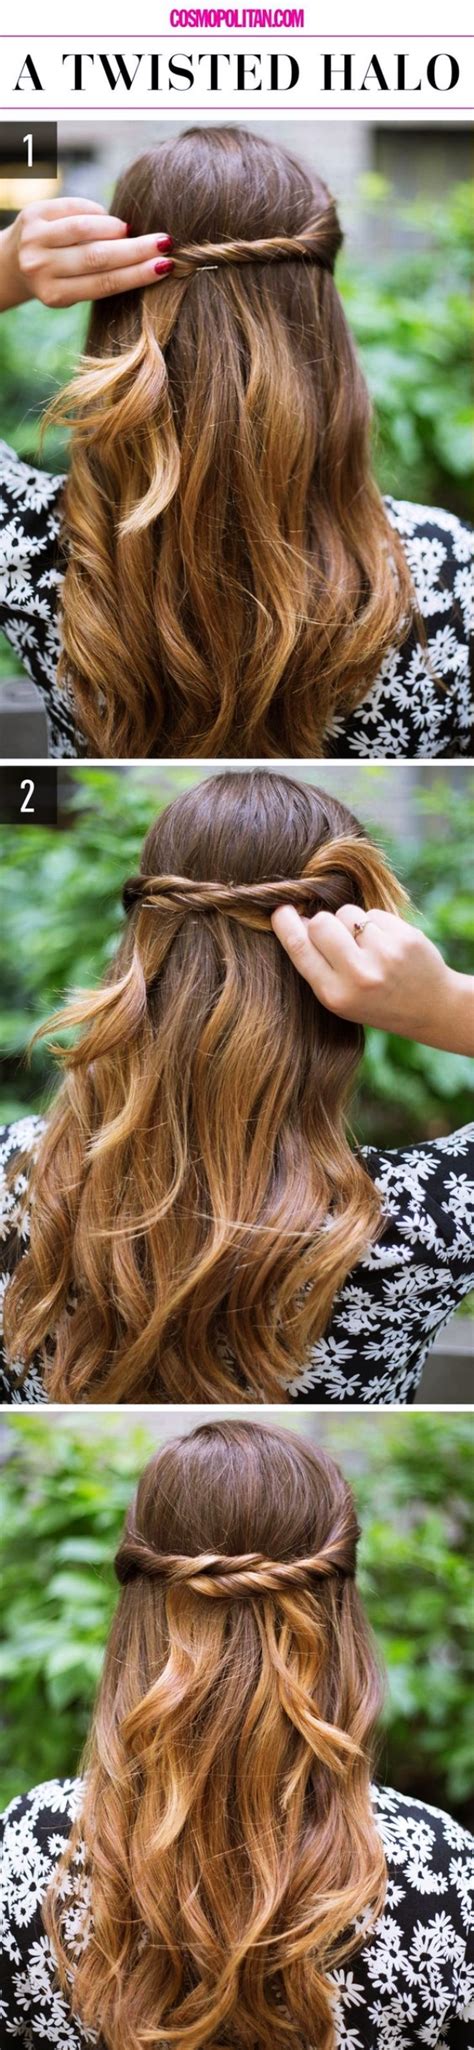 Best most popularb daily quick hairstyle ideas comb the hairs at the front to one side covering the side of your forehead as shown in the picture. 25 Absolutely New and Easy Hairstyles to Try in 2018 (Before Anyone)